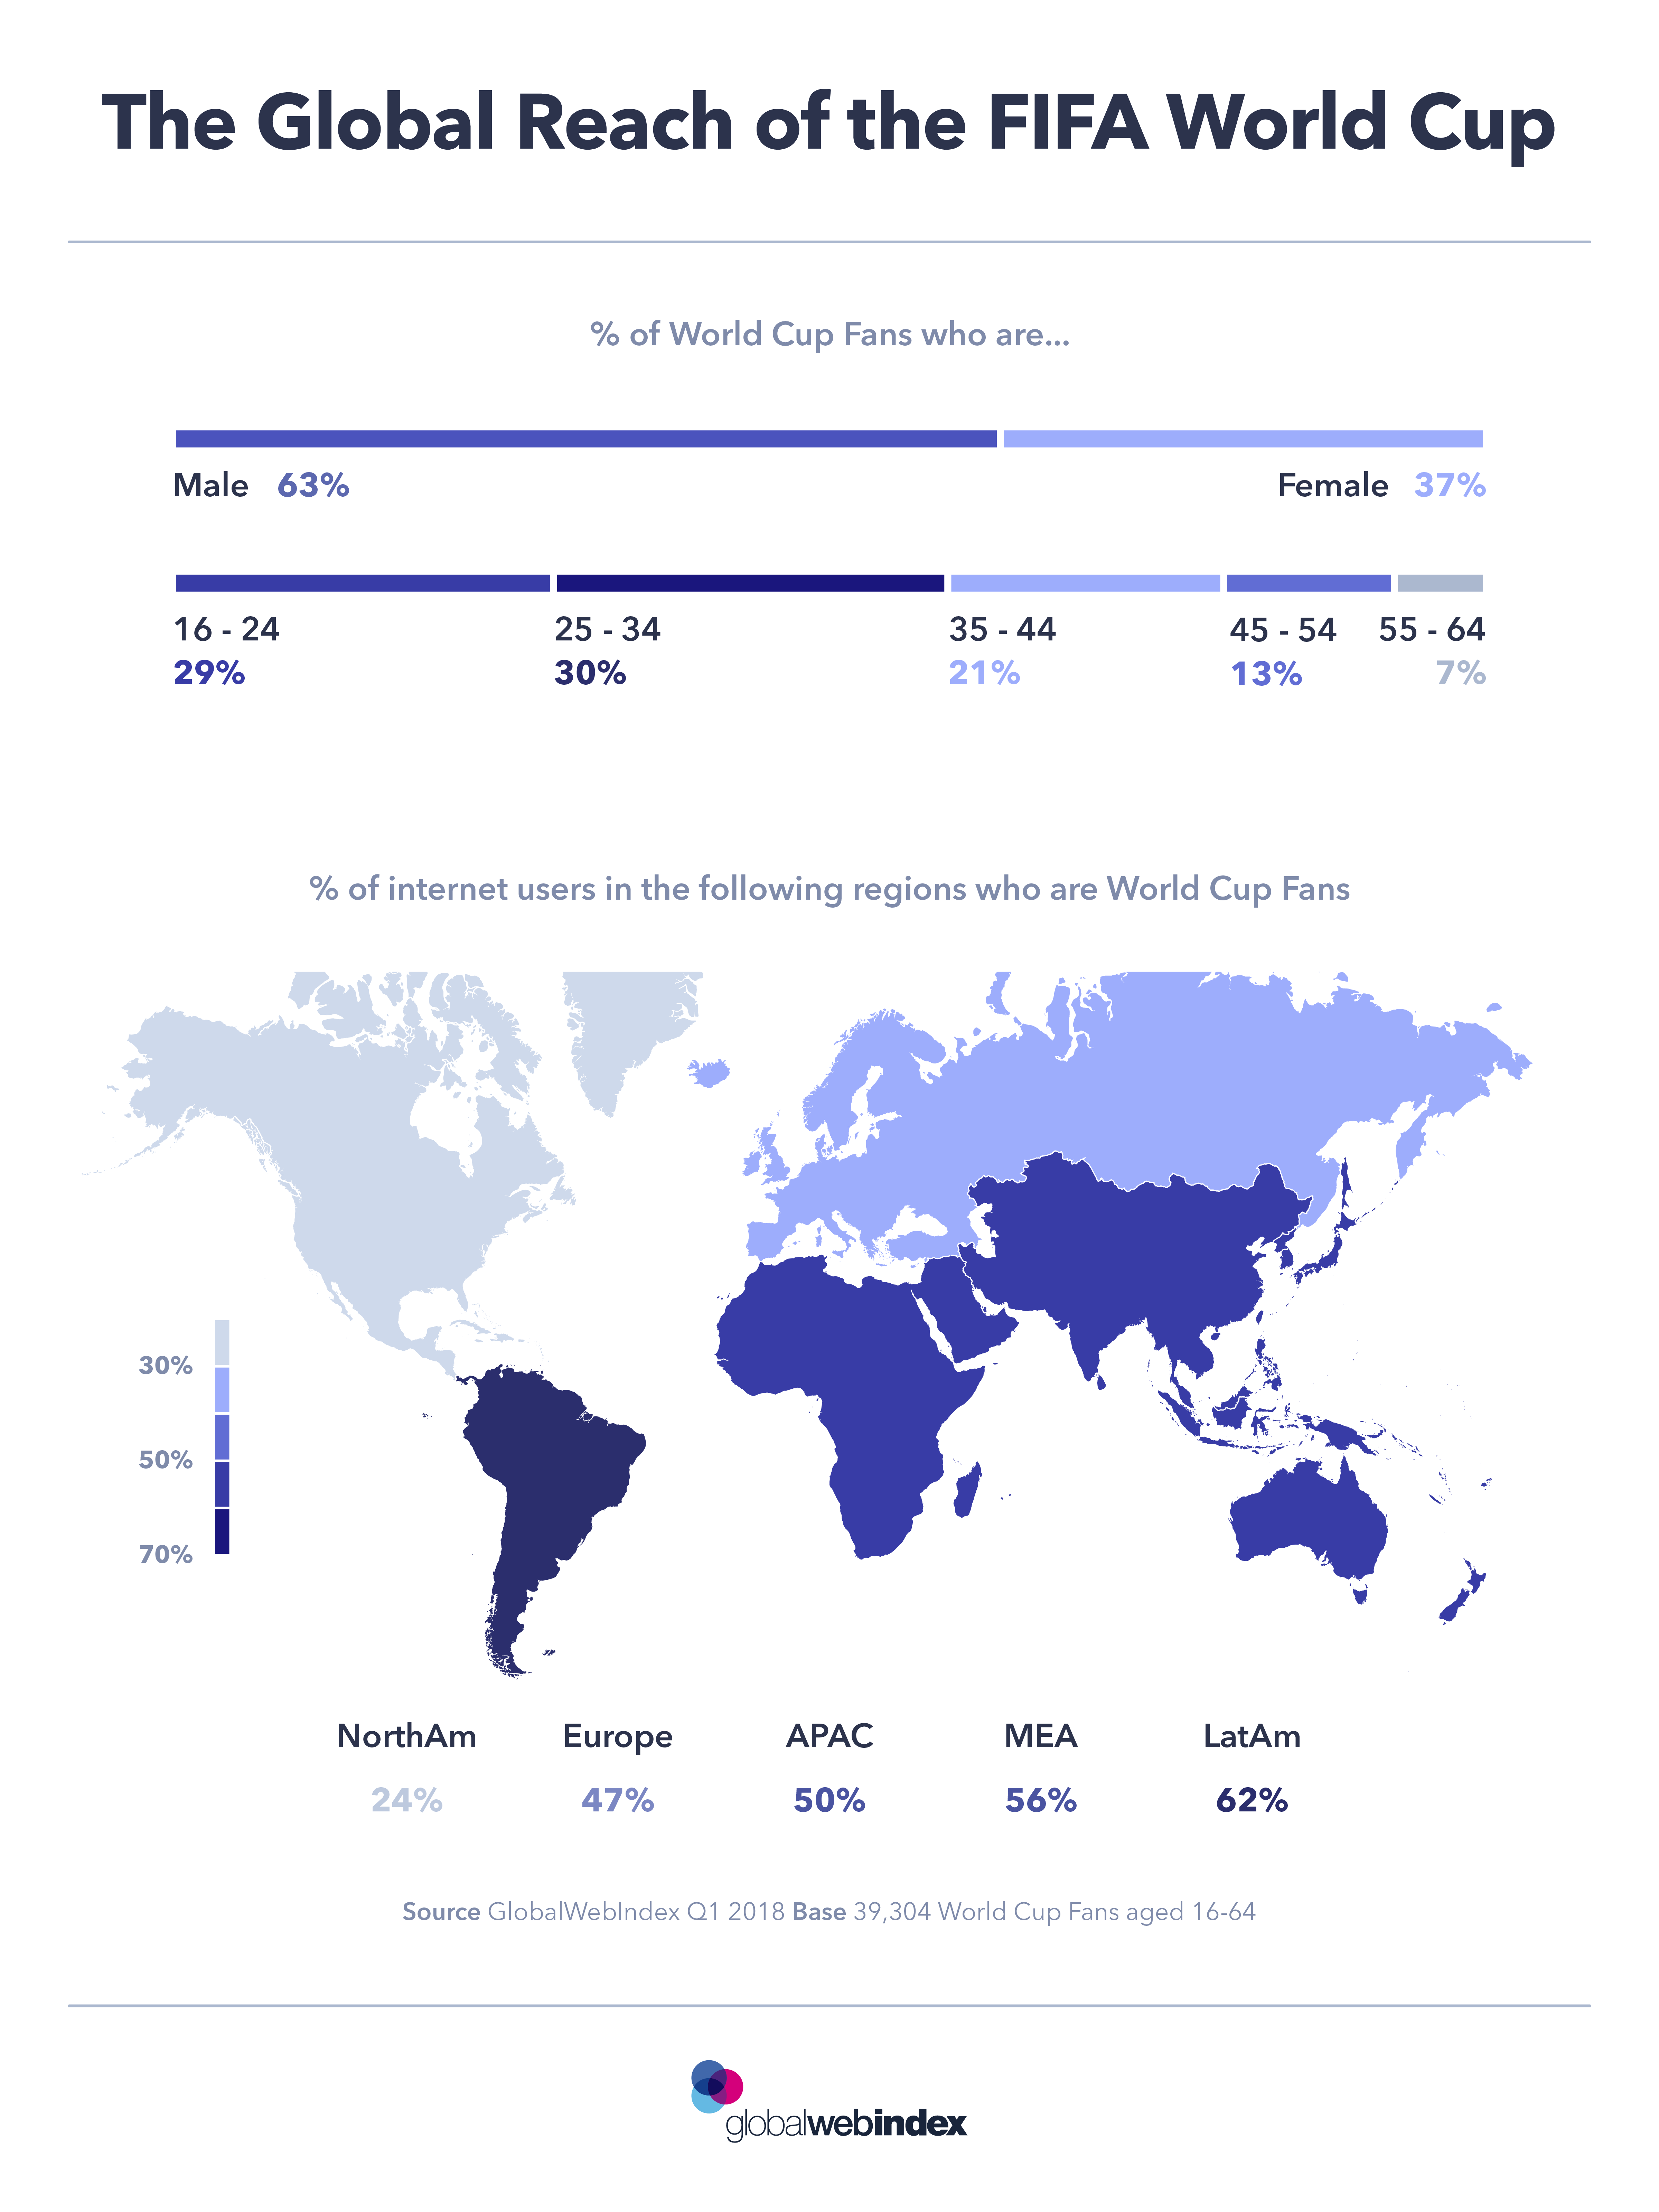 The Global Reach of the FIFA World Cup